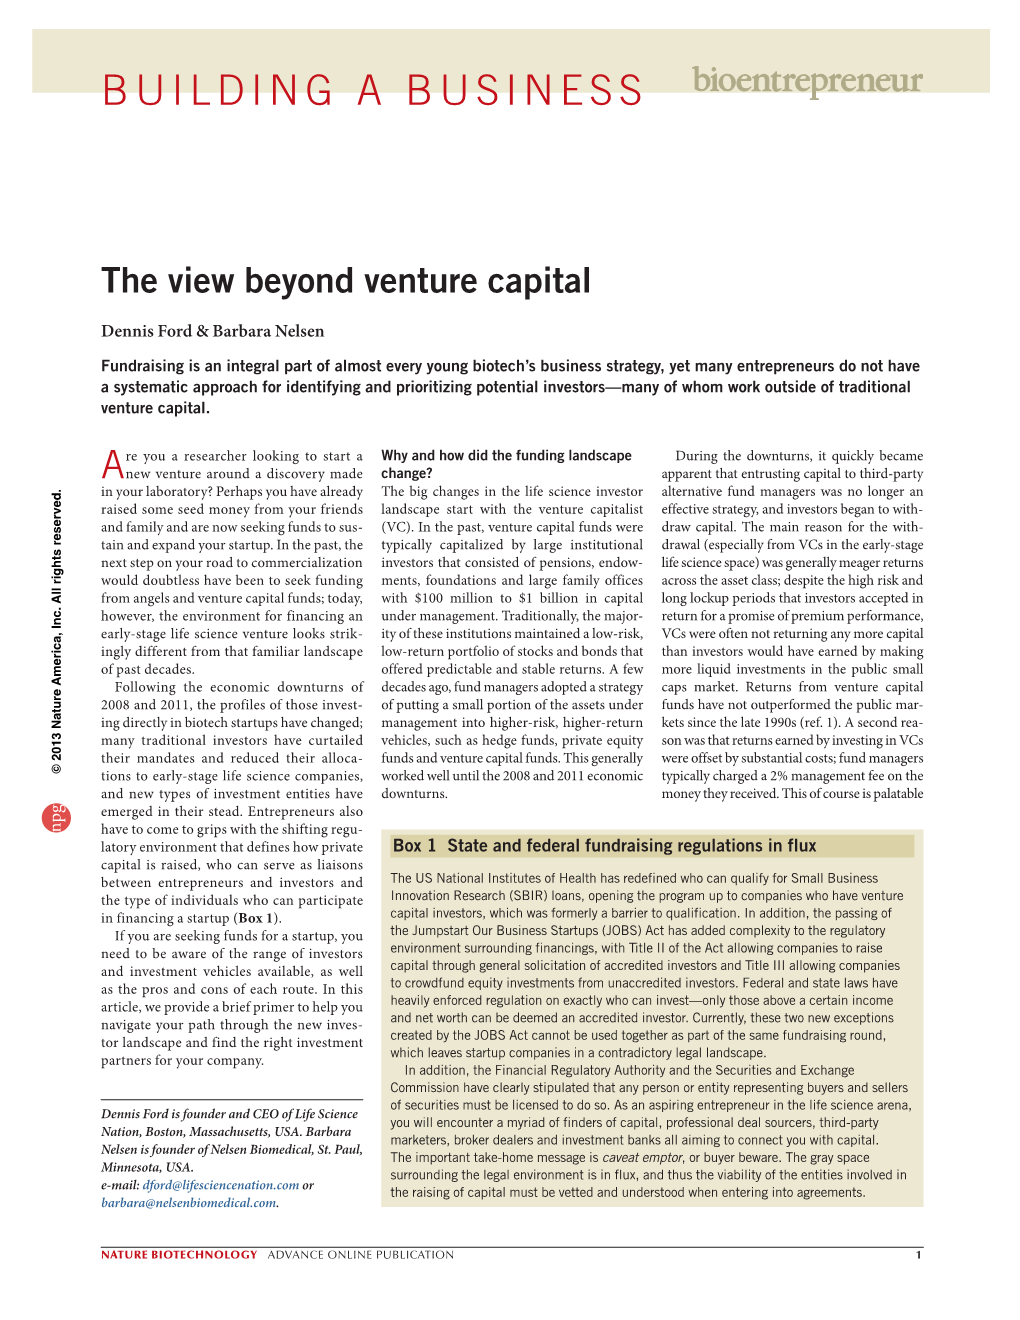 The View Beyond Venture Capital